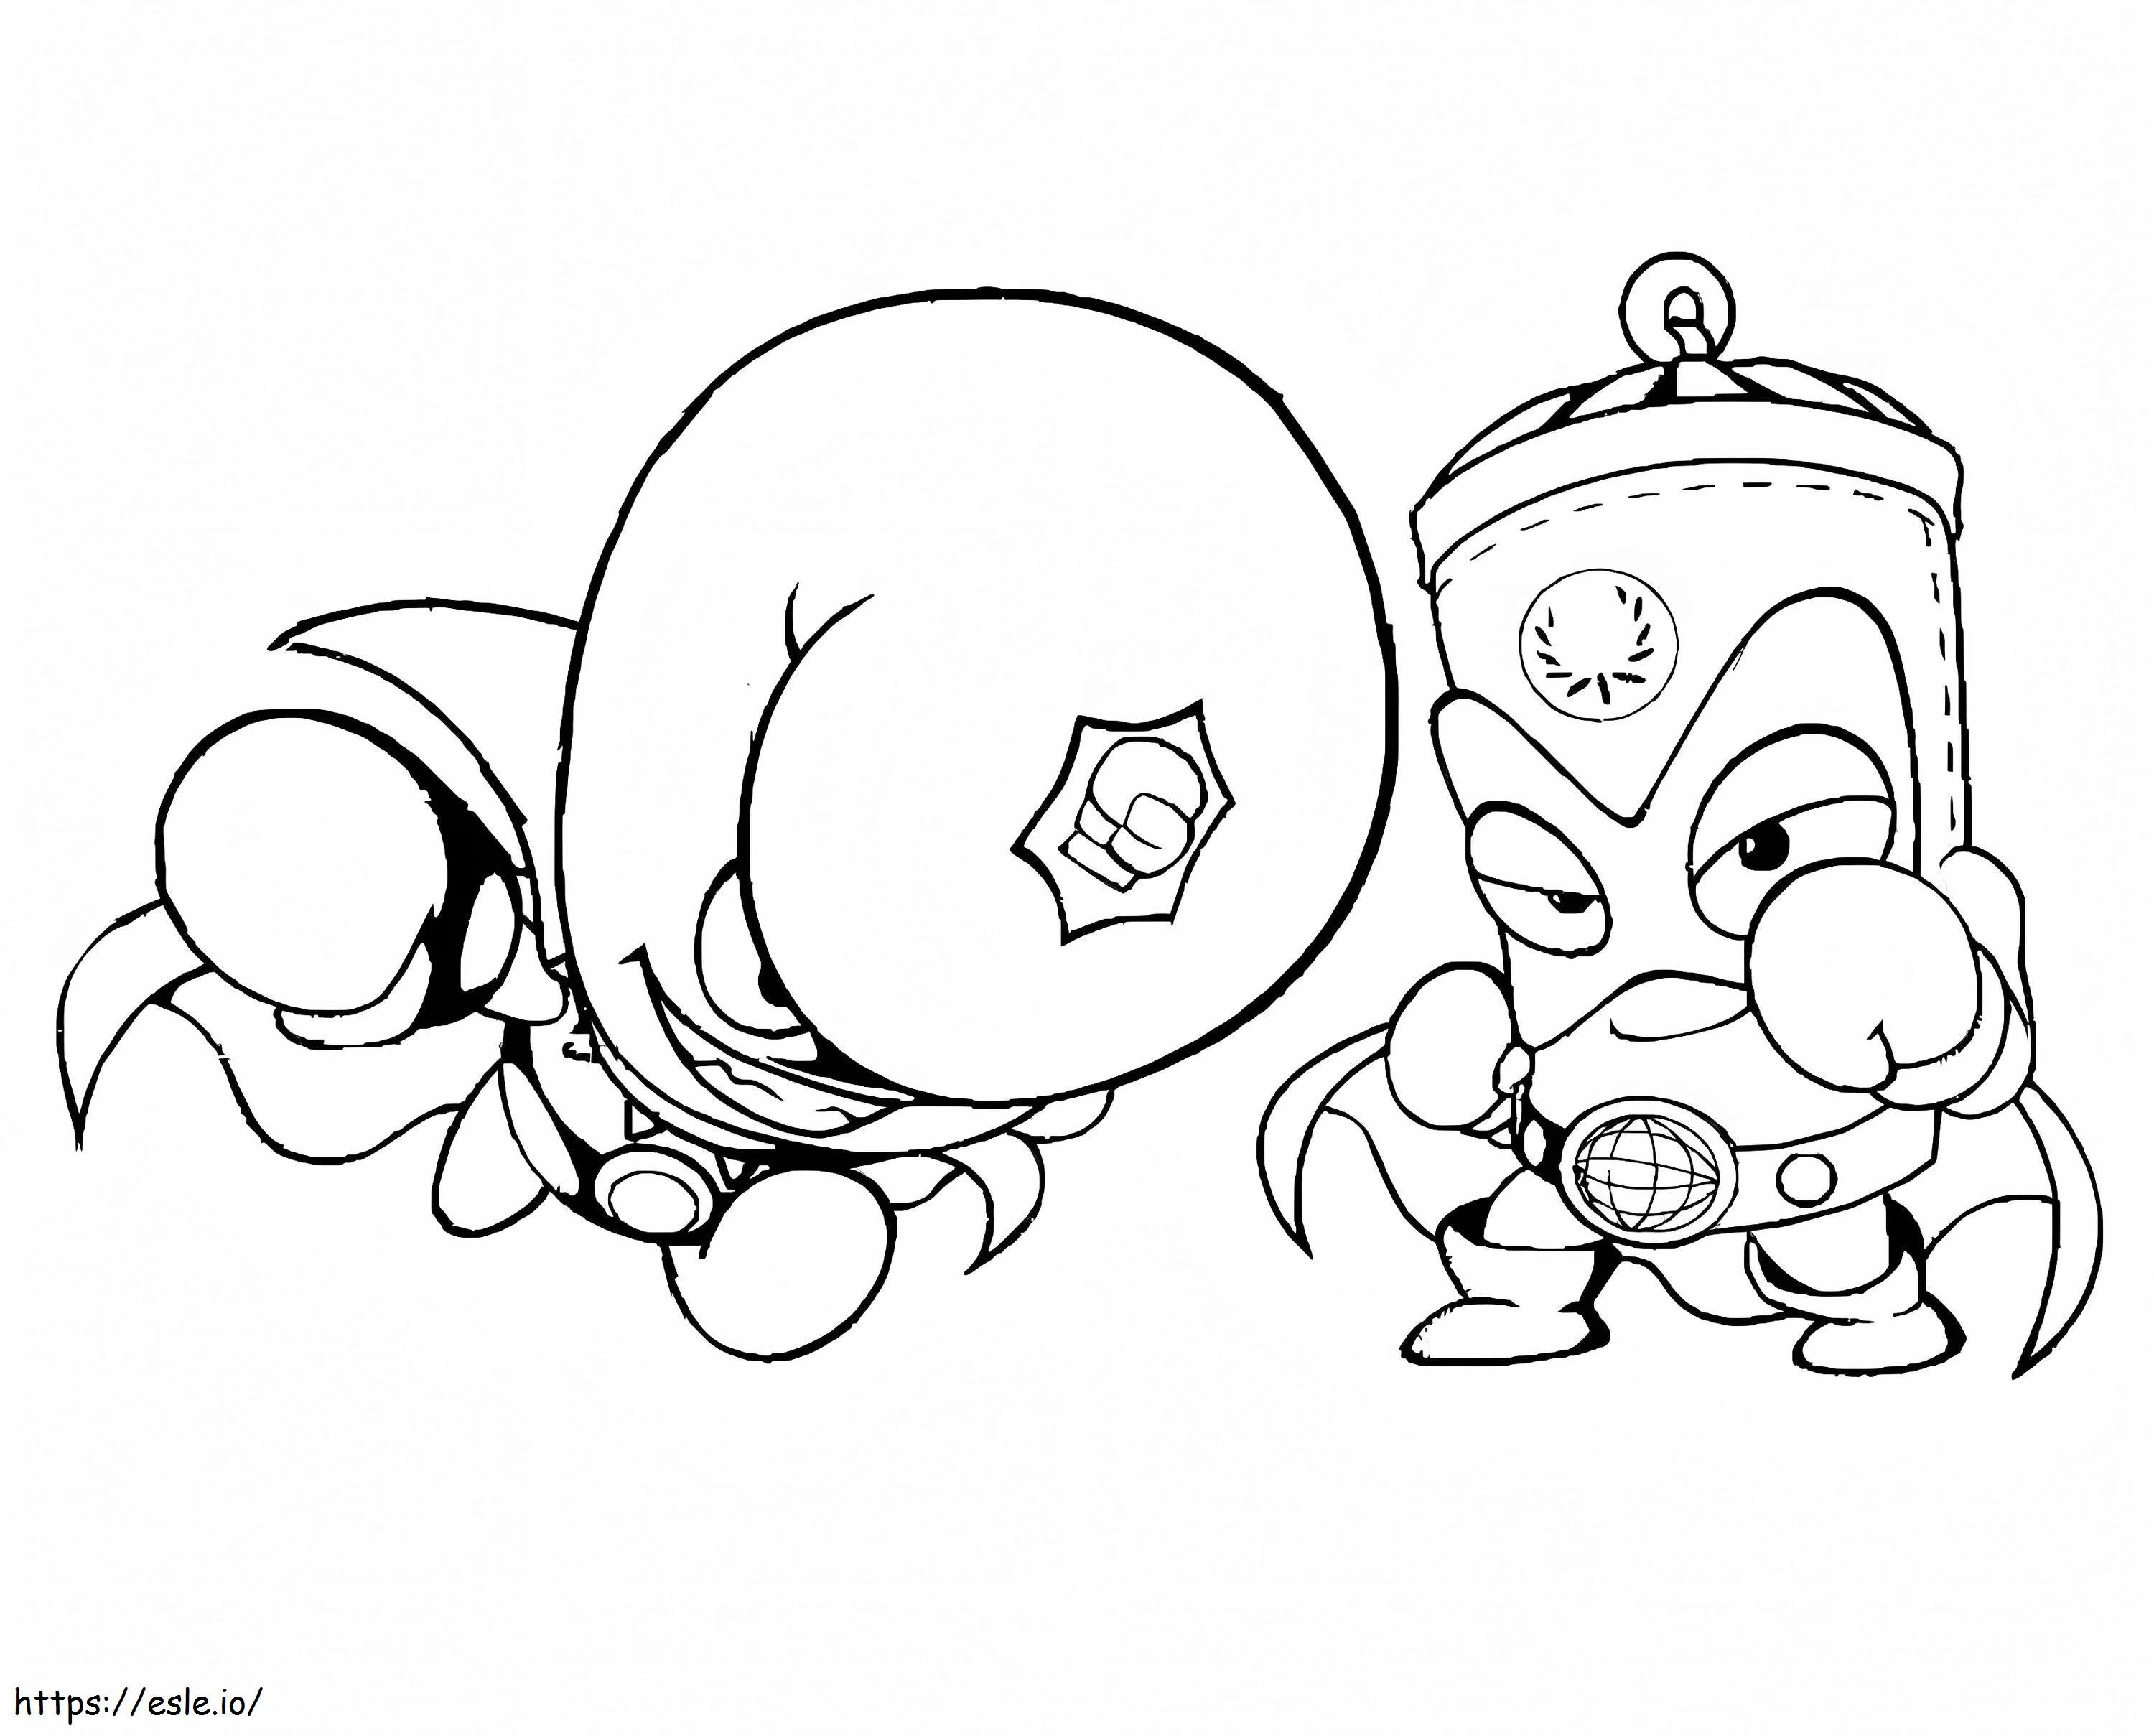 The Champ And Pow Power Superzings coloring page